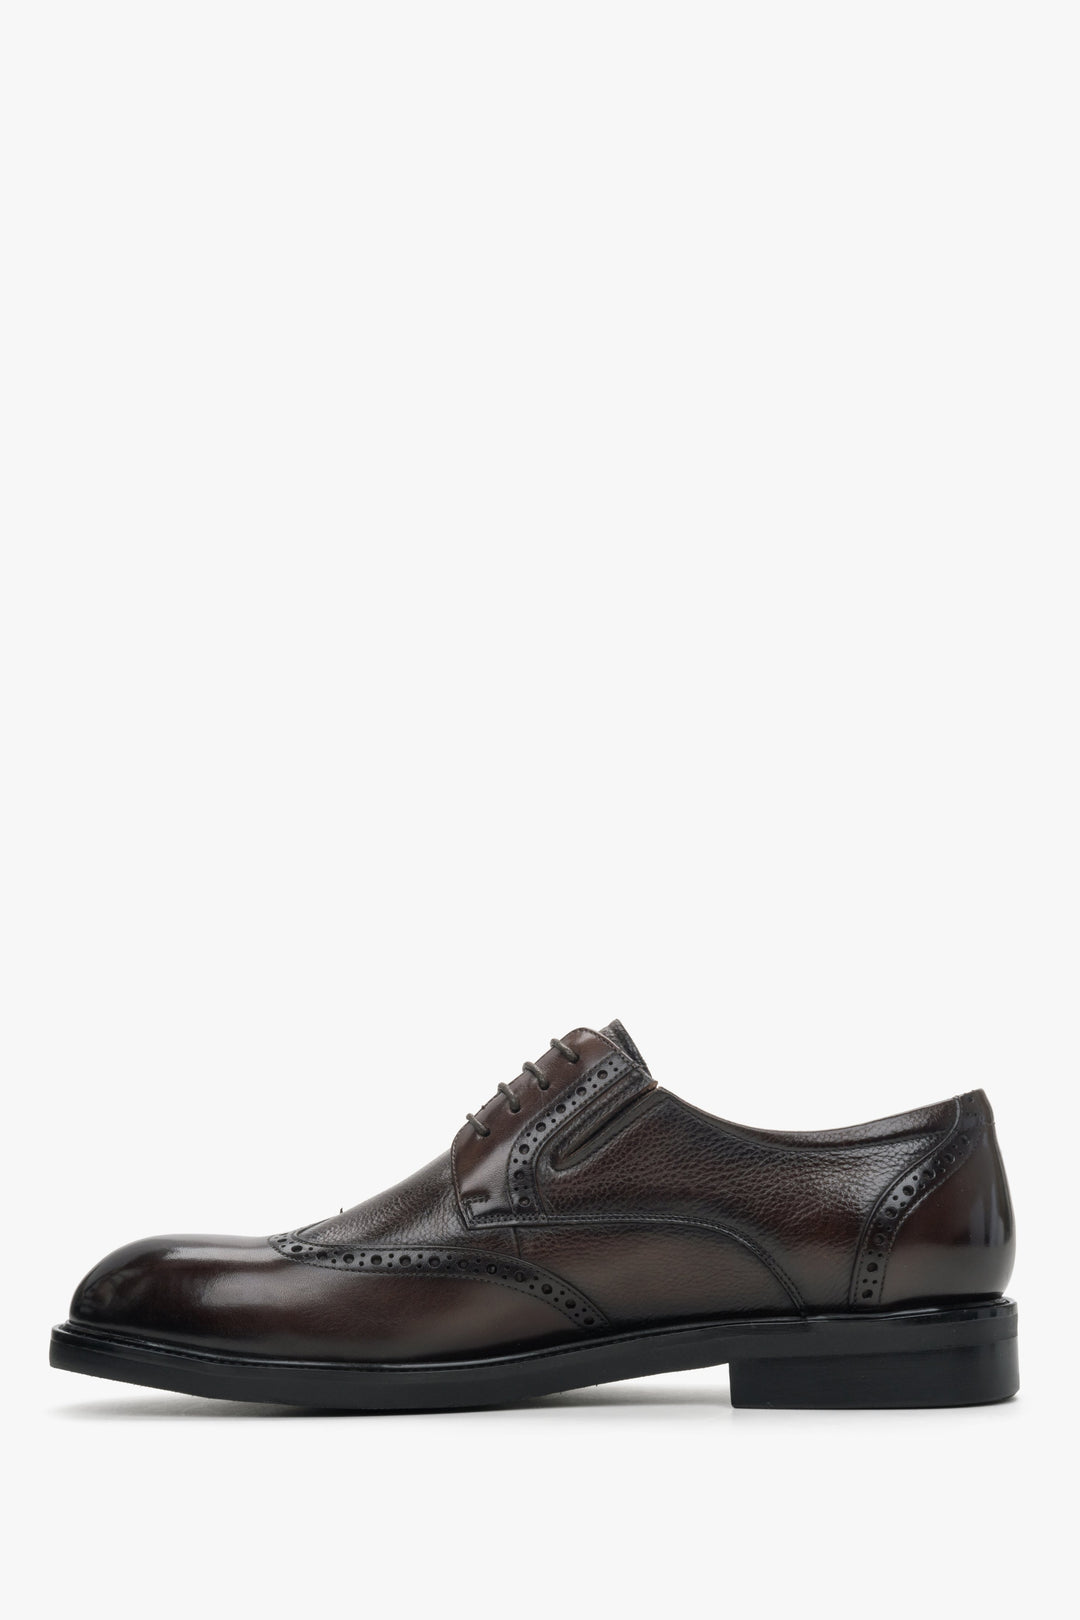 Estro men's brown leather shoes - side profile of the shoe.